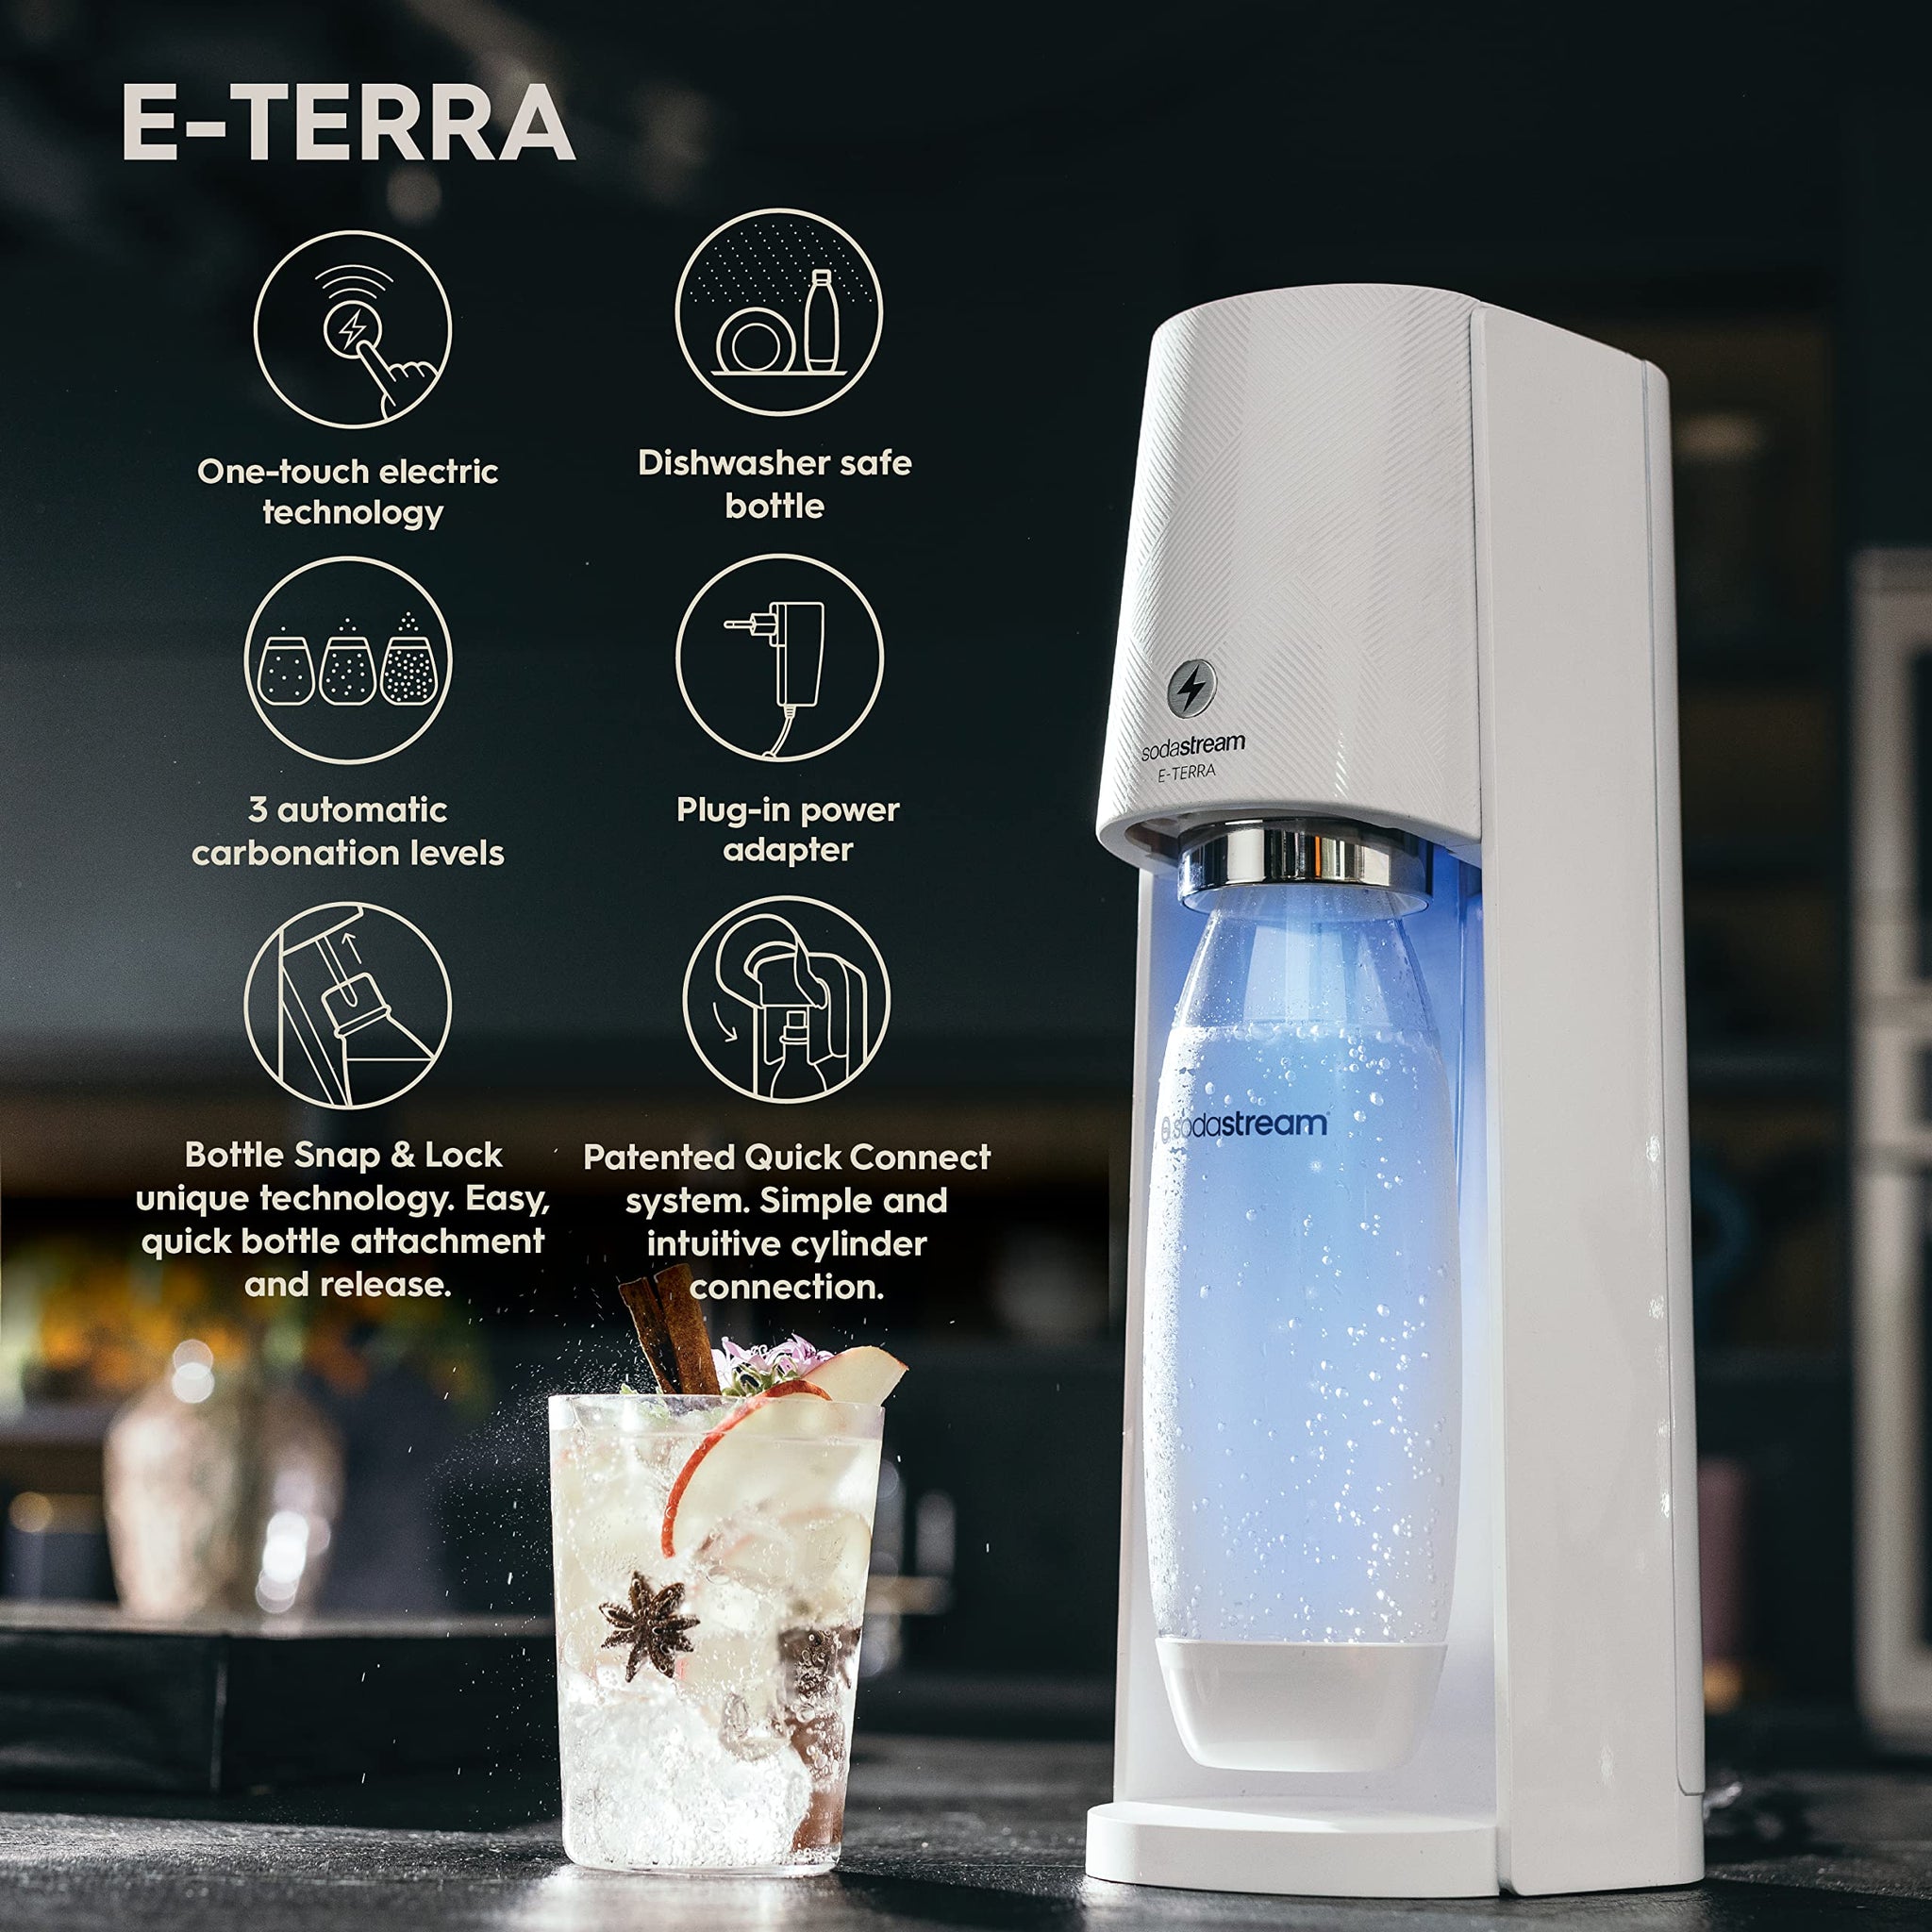 SodaStream Terra Sparkling Water Maker Bundle (Black), with CO2, DWS  Bottles, and Bubly Drops Flavors